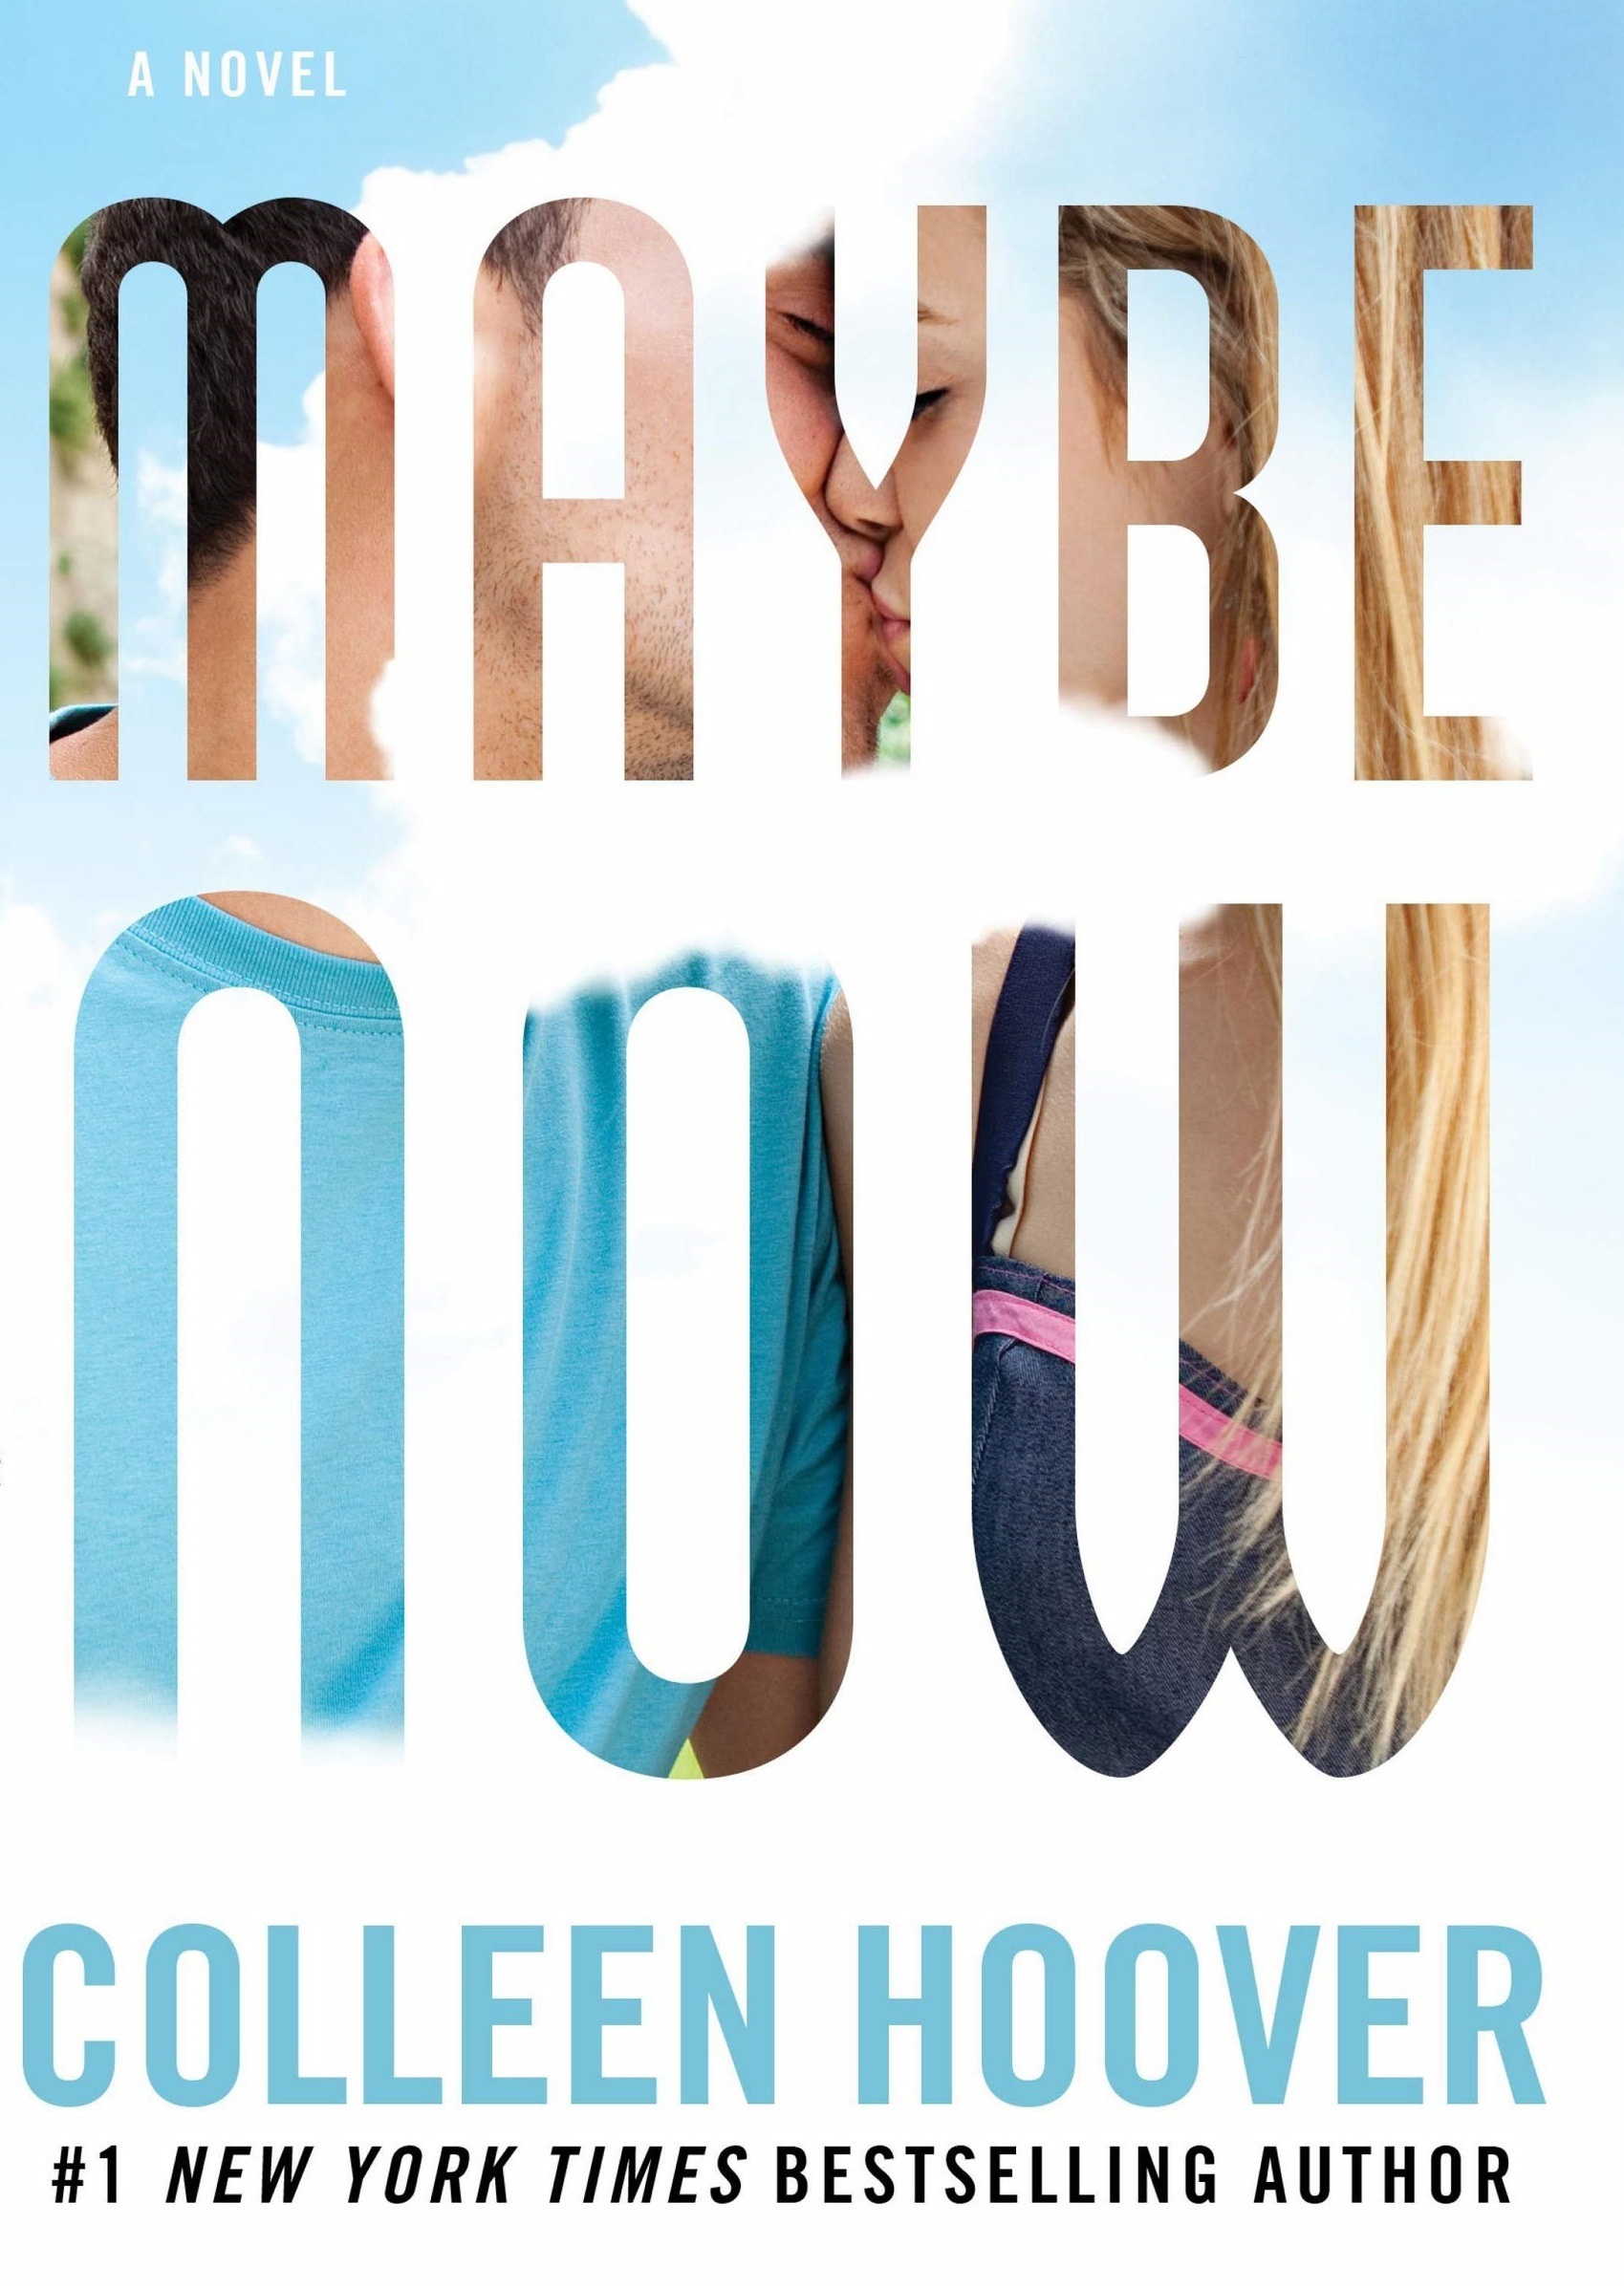 MAYBE NOW BY COLLEEN HOOVER